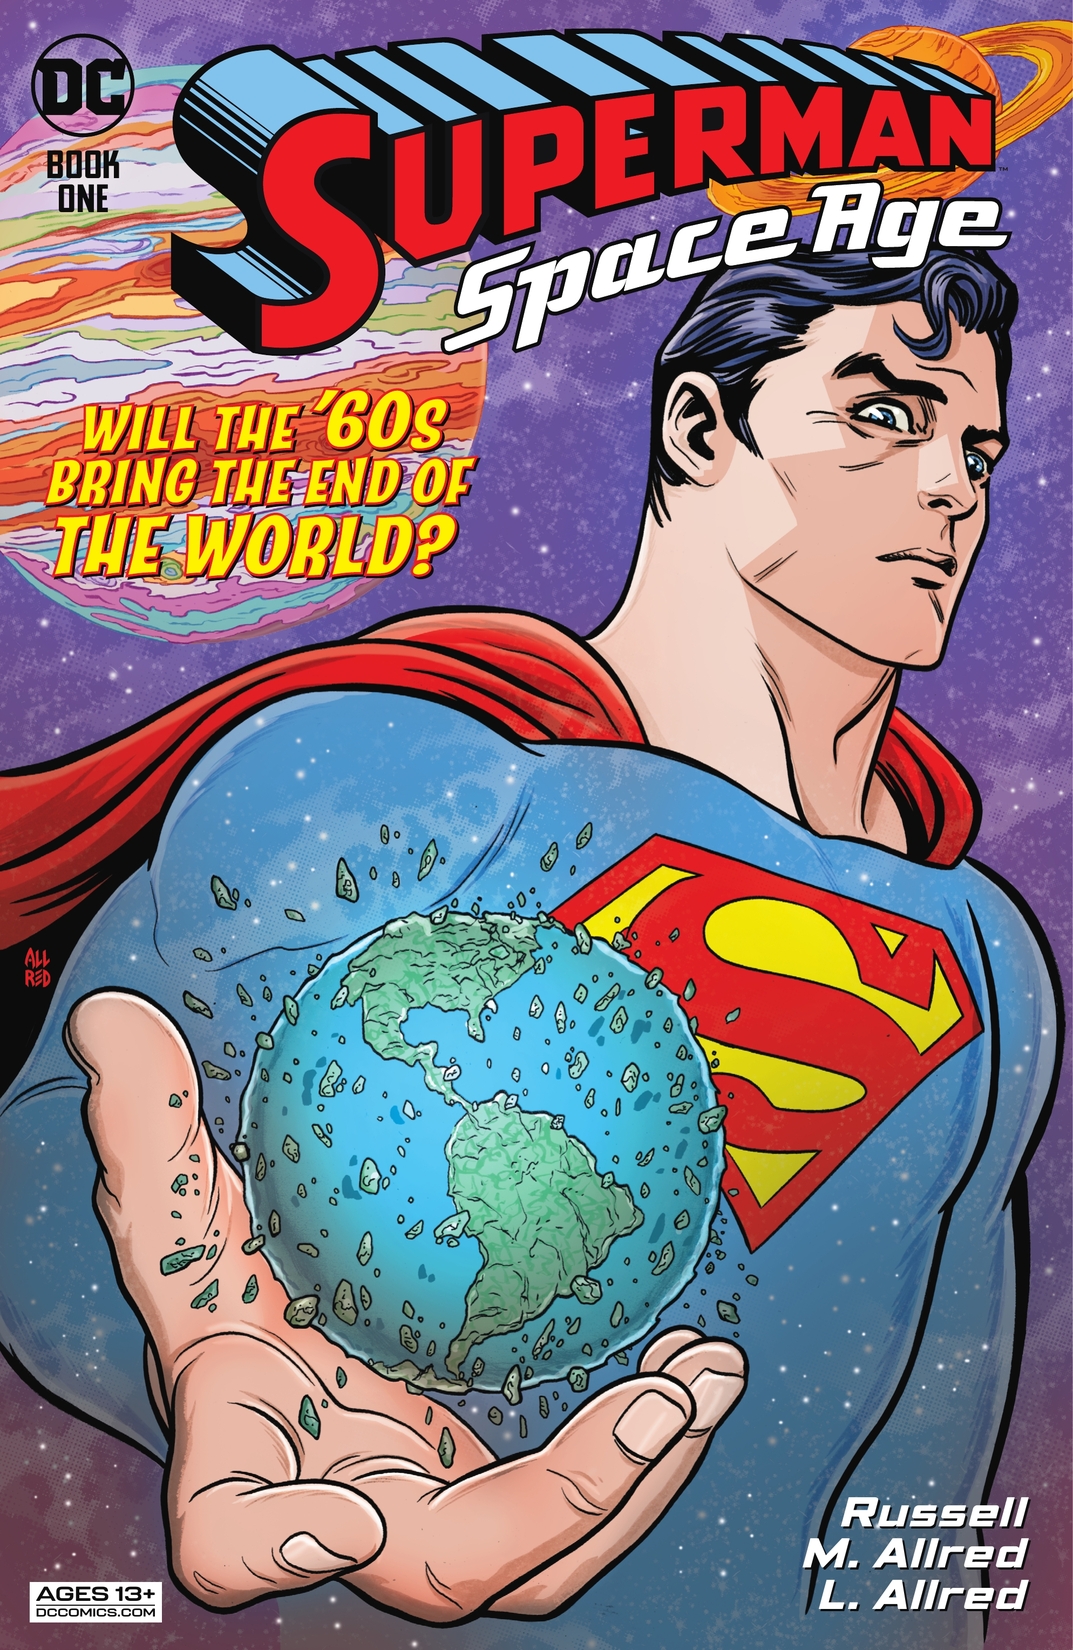 Superman: Space Age #1 preview images